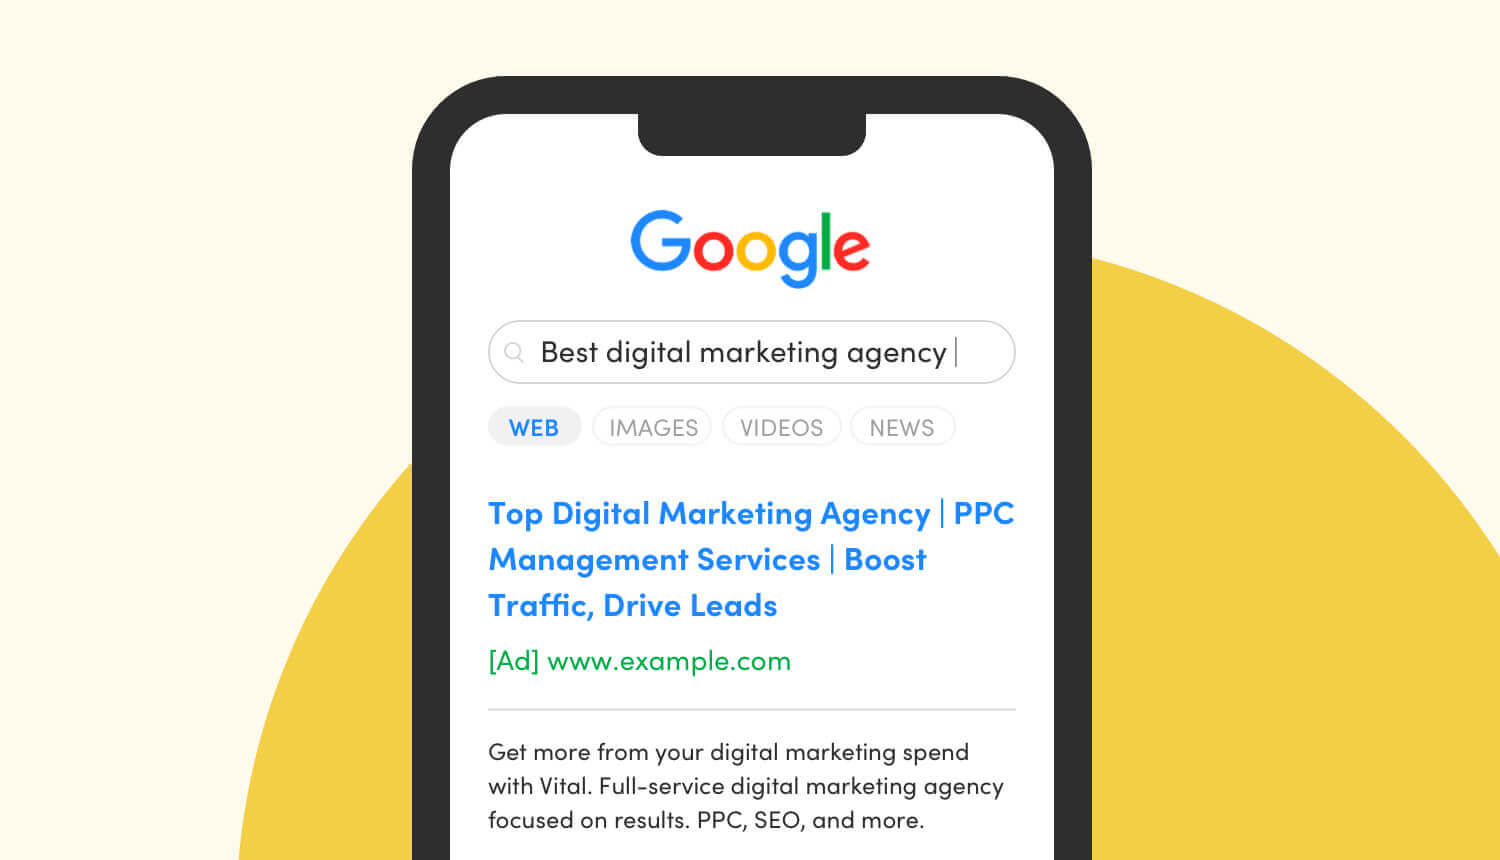 An example of a Google responsive search ad on a mobile device. The search query is “Best digital marketing agency.” The ad shows three headlines, an example URL path, and two descriptions.